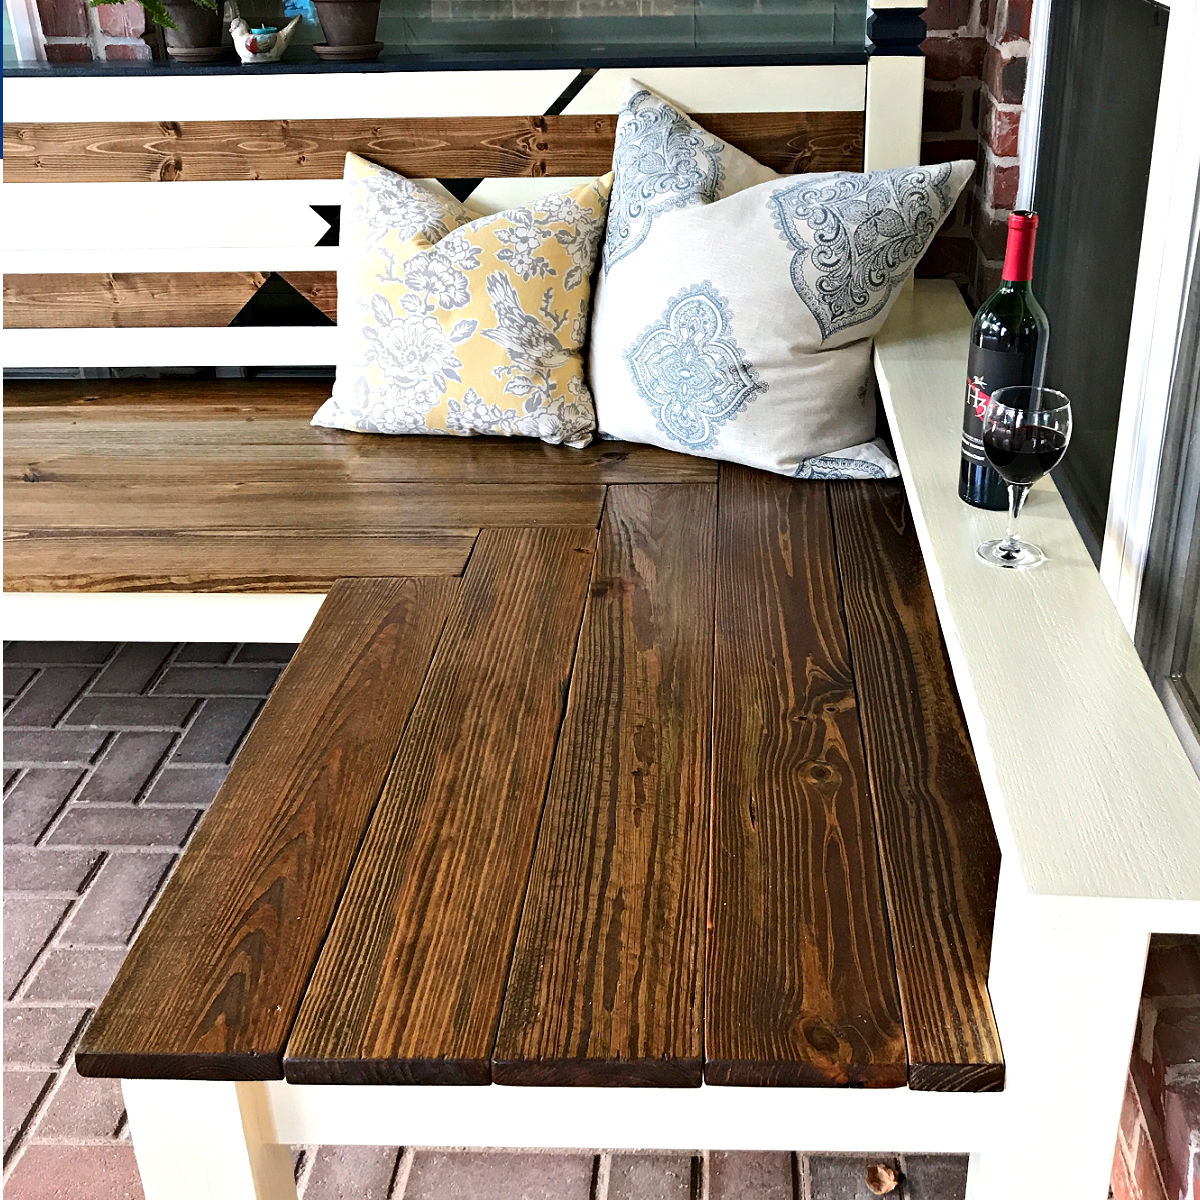 DIY Outdoor Corner Bench Build - I LOVE this one! - Abbotts At Home